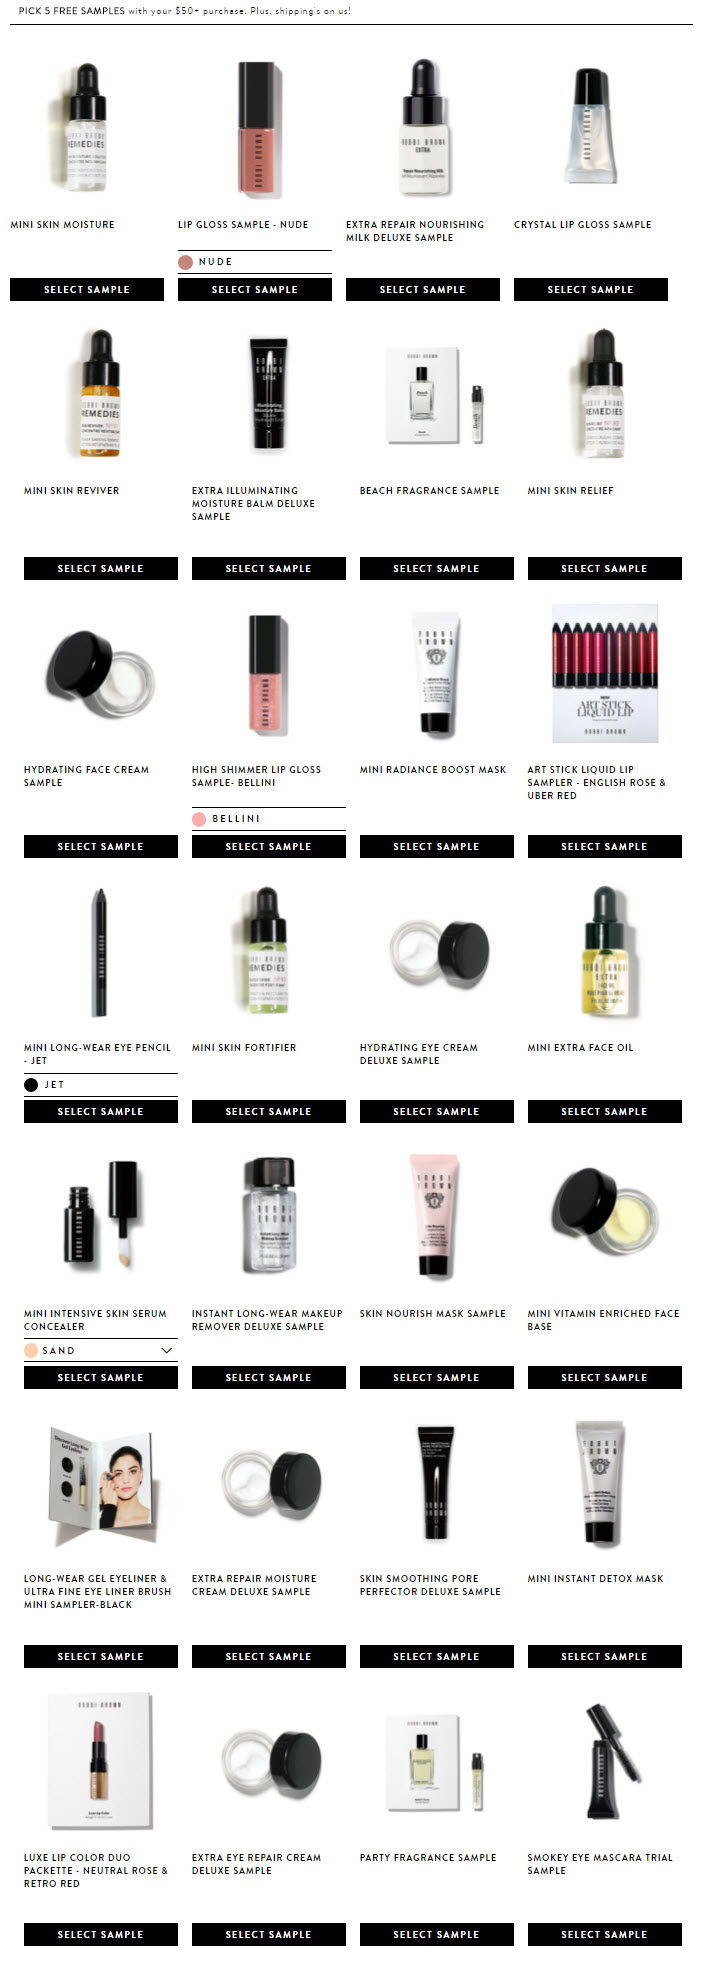 Receive your choice of 5-piece bonus gift with your $50 Bobbi Brown purchase